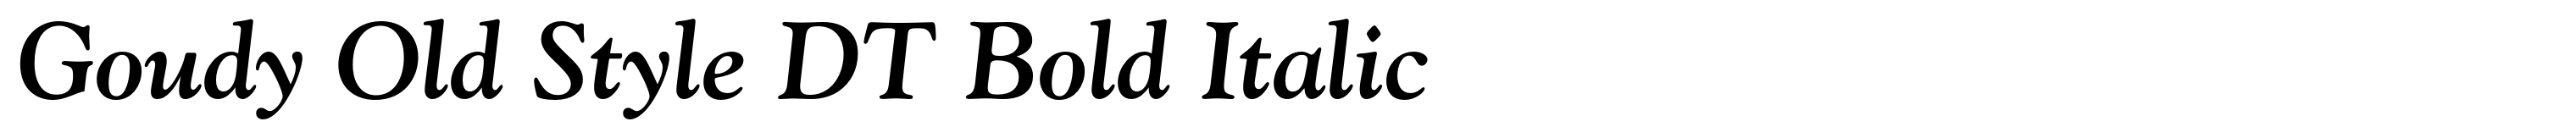 Goudy Old Style DT Bold Italic